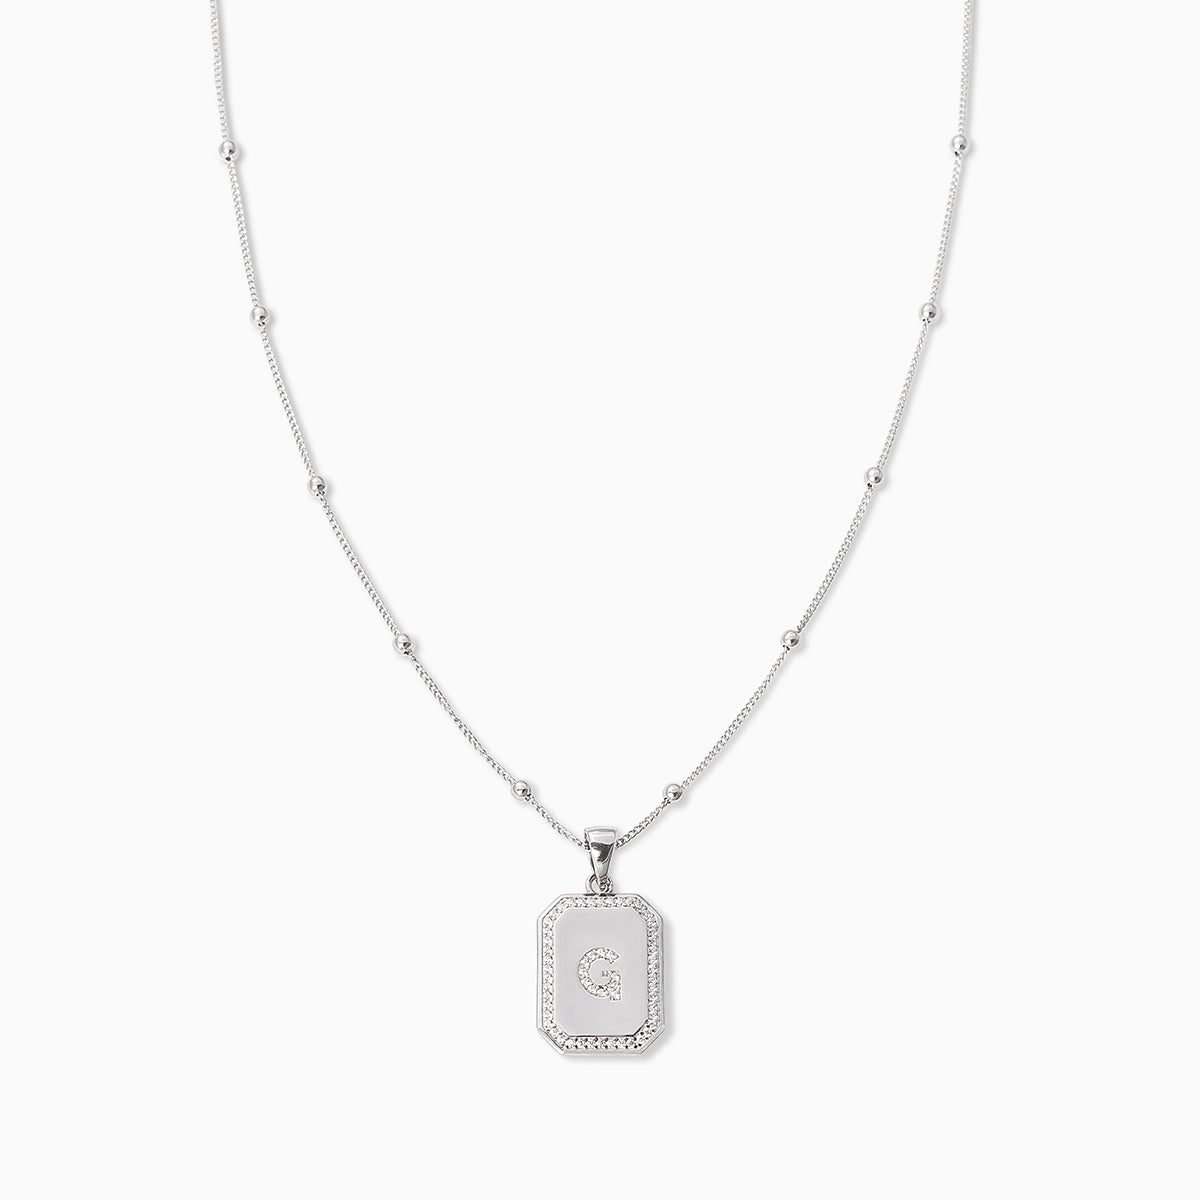 Sur 2.0 Necklace | Sterling Silver G | Product Image | Uncommon James